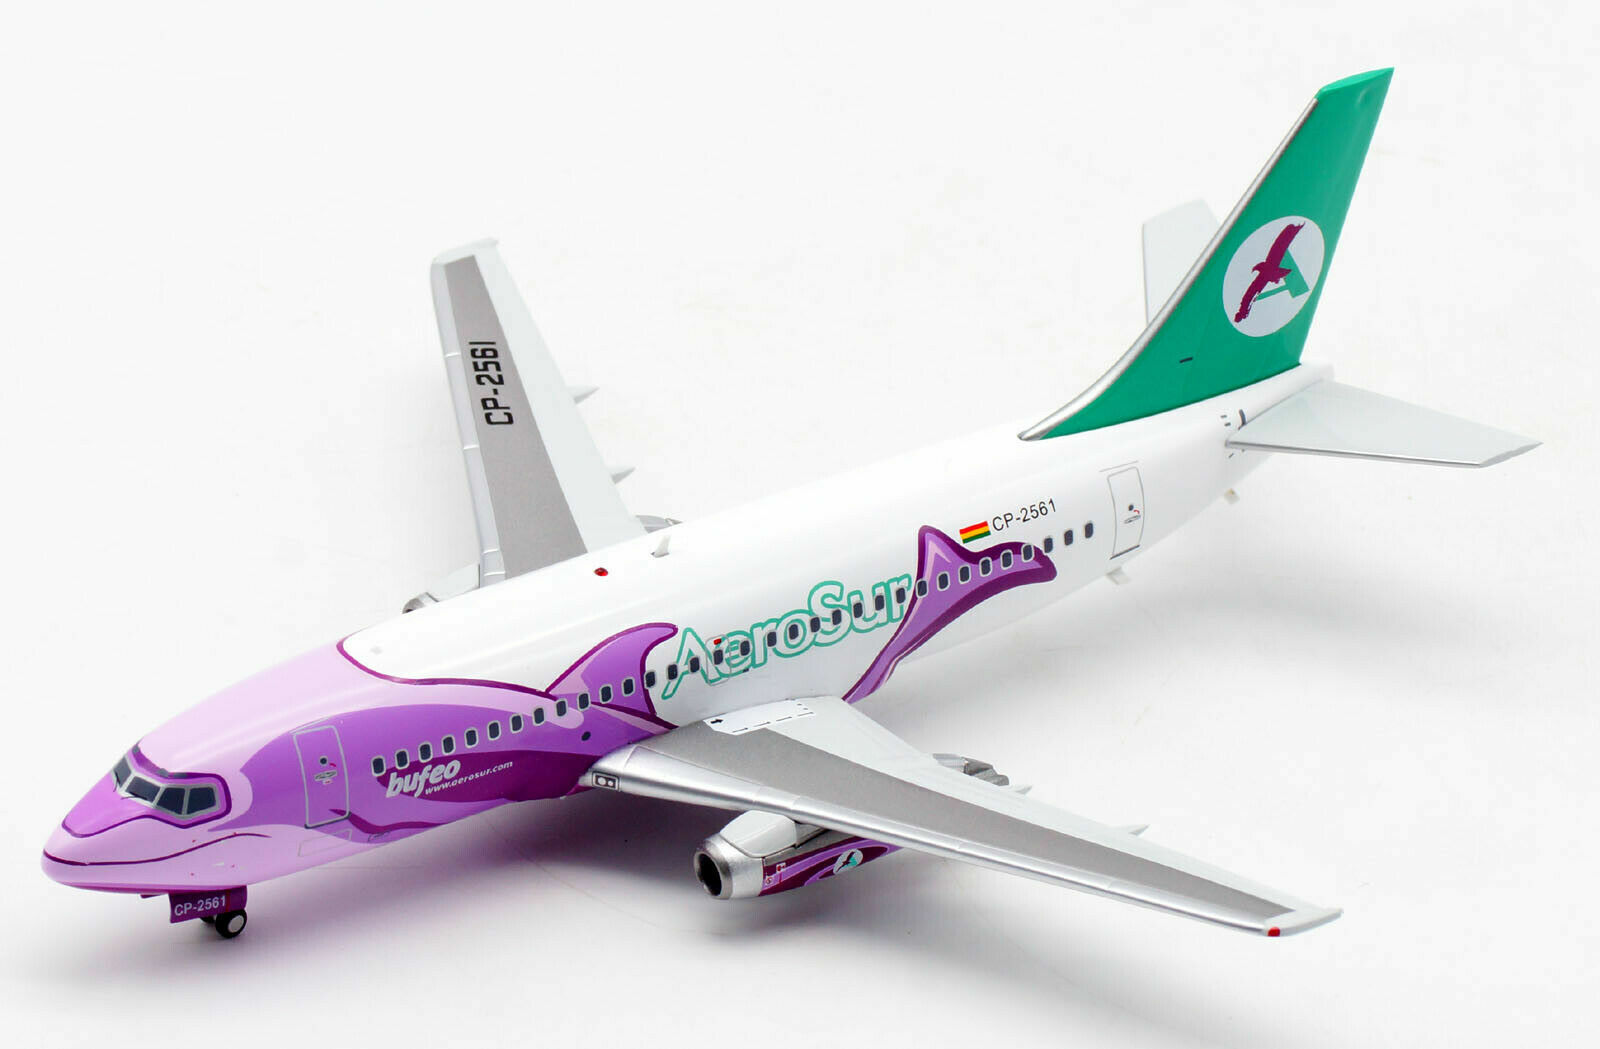 1:200 IF200 Aerosur B737-200 CP-2561 (BUFEO) with stand 